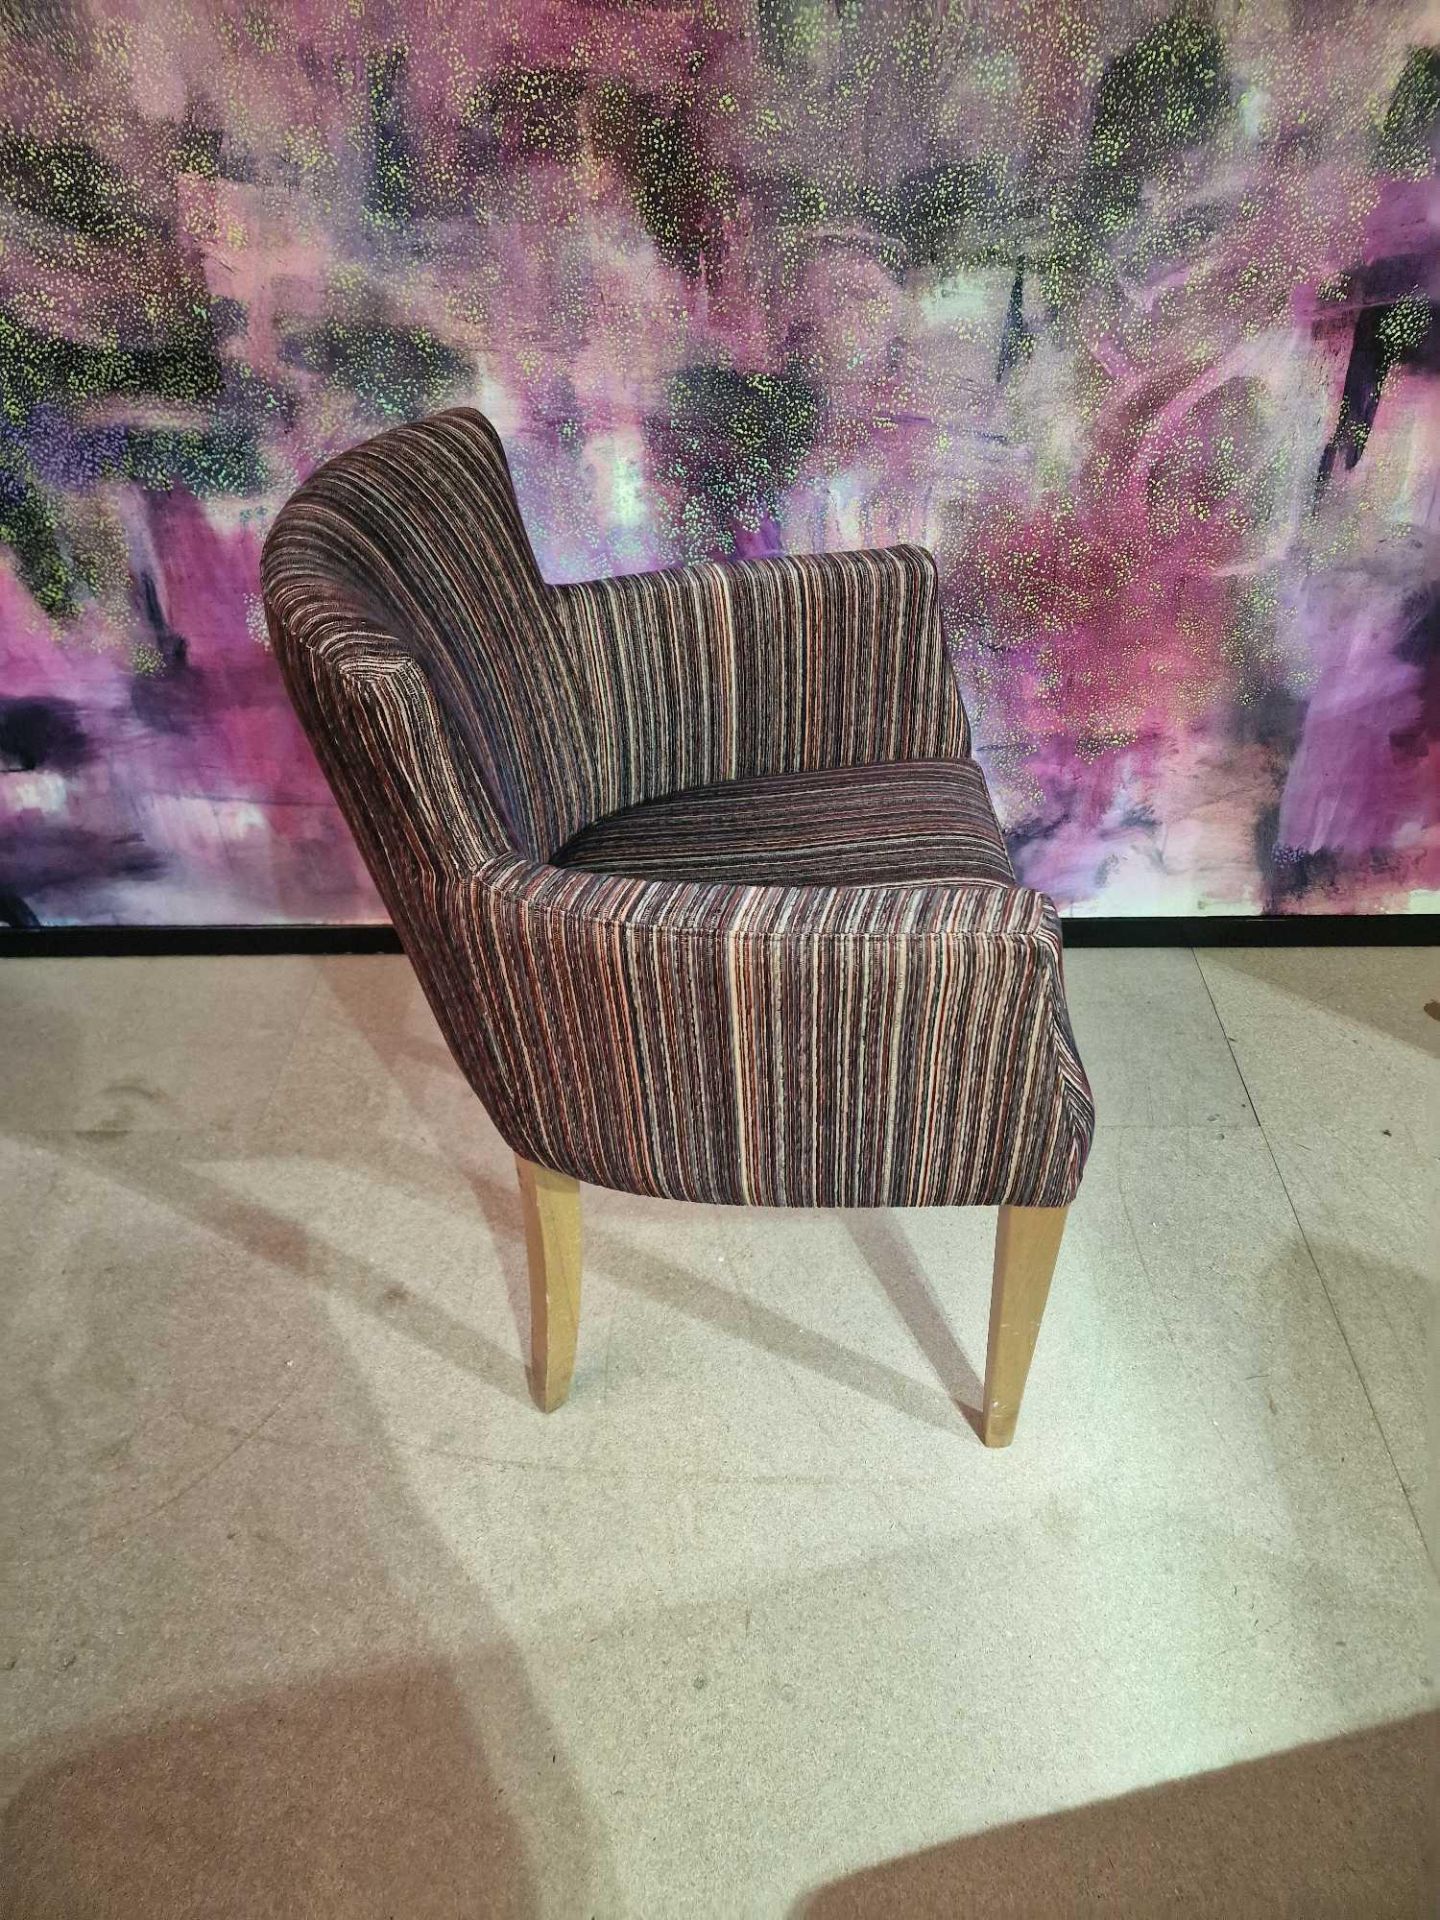 Contemporary dining chair Upholstered in a modern striped pattern fabric, the high arm rests and - Bild 2 aus 2